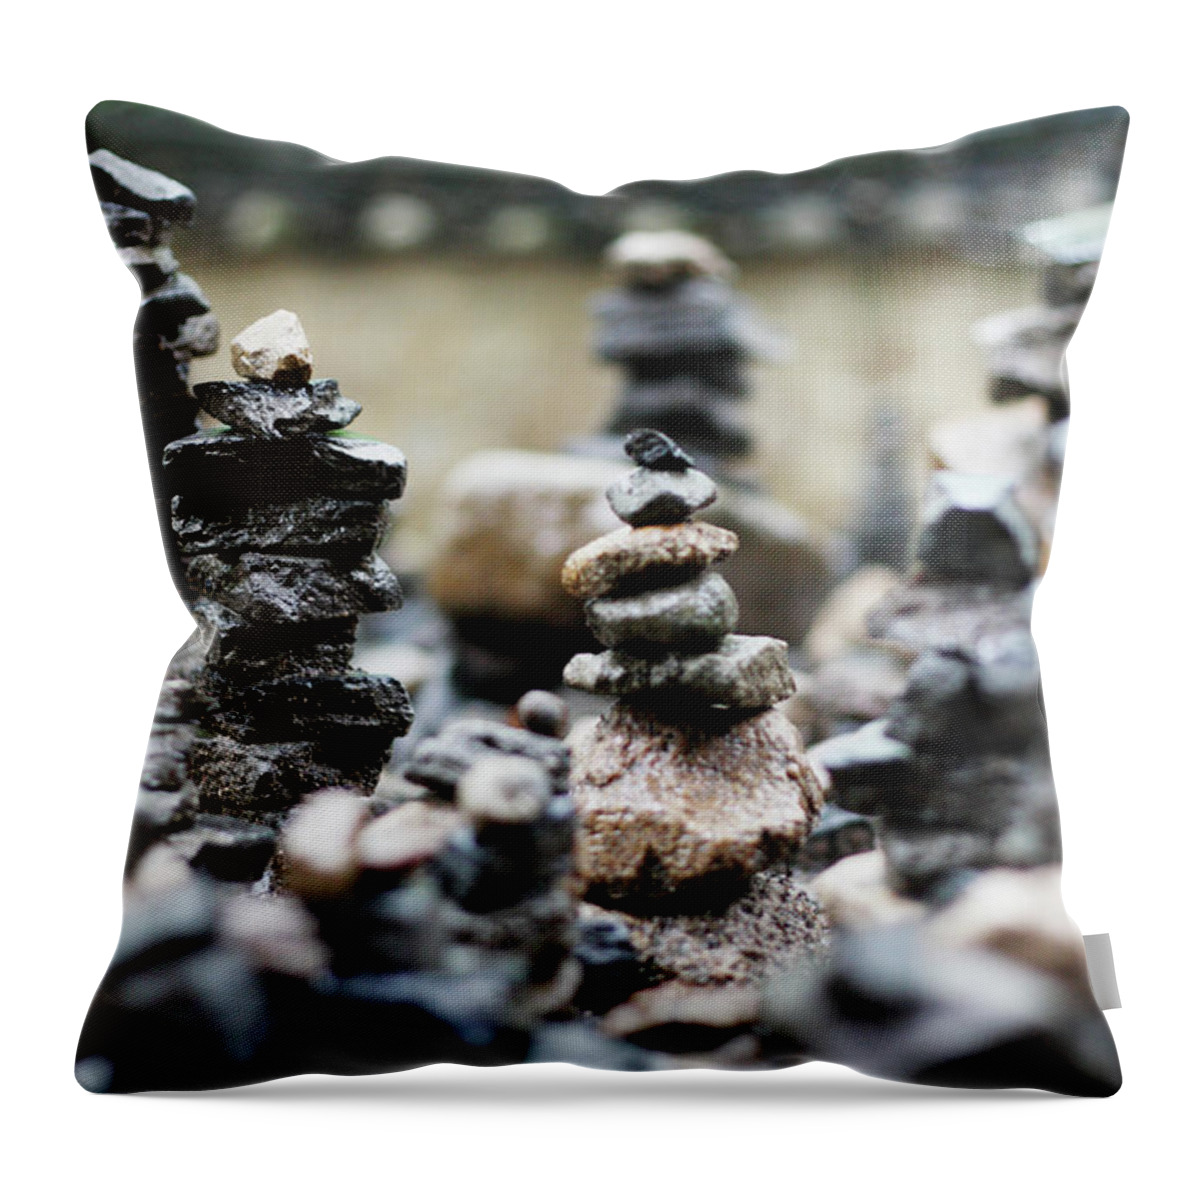 Tranquility Throw Pillow featuring the photograph Small Stones by Marc-henri Desbois